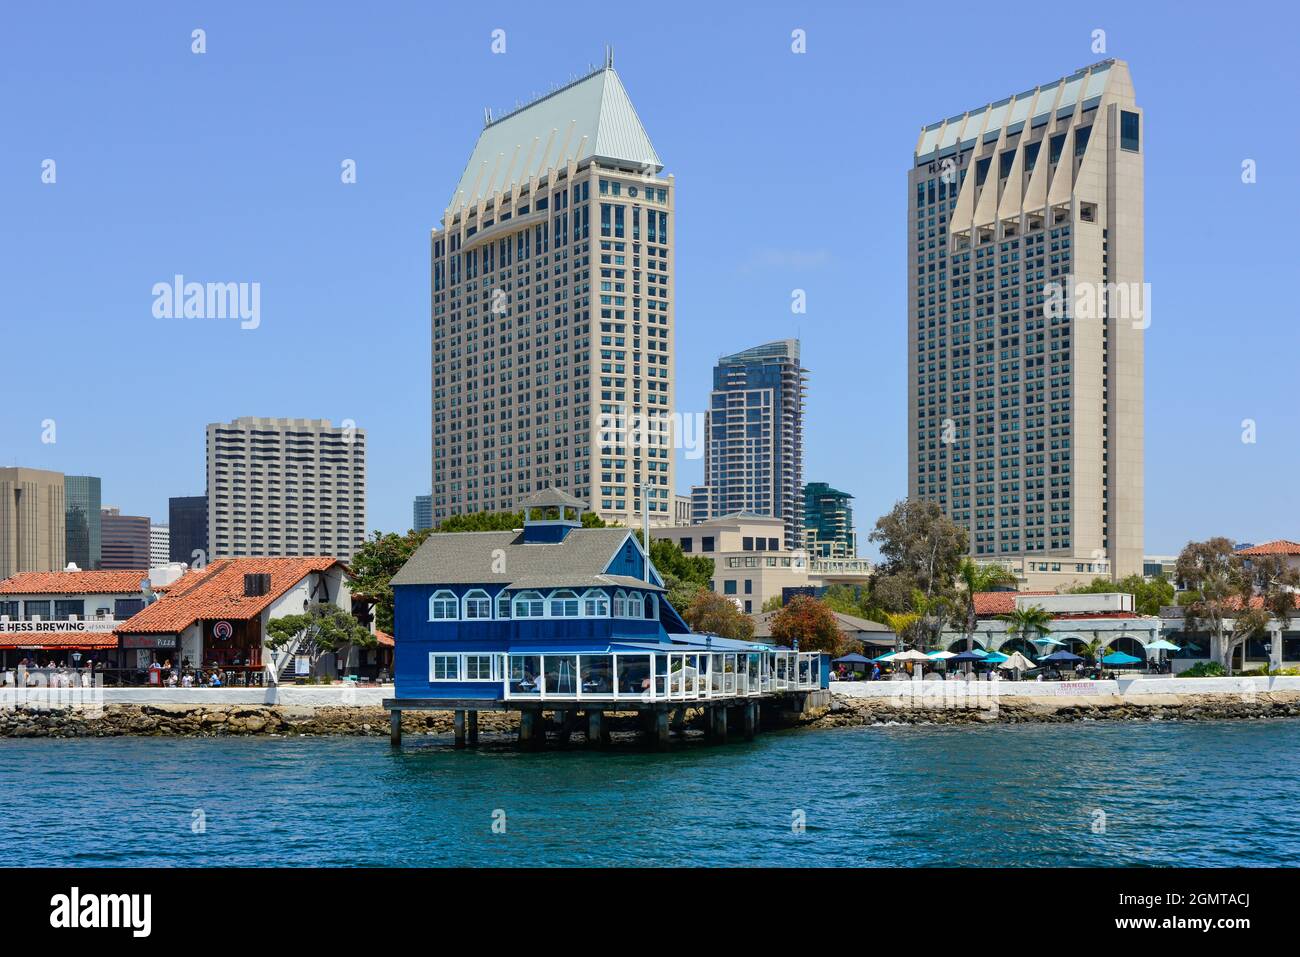 The San Diego Pier restaurant in blue and white retro style on stilts in Seaport Village, with looming high-rise buildings on bay of San Diego, CA Stock Photo